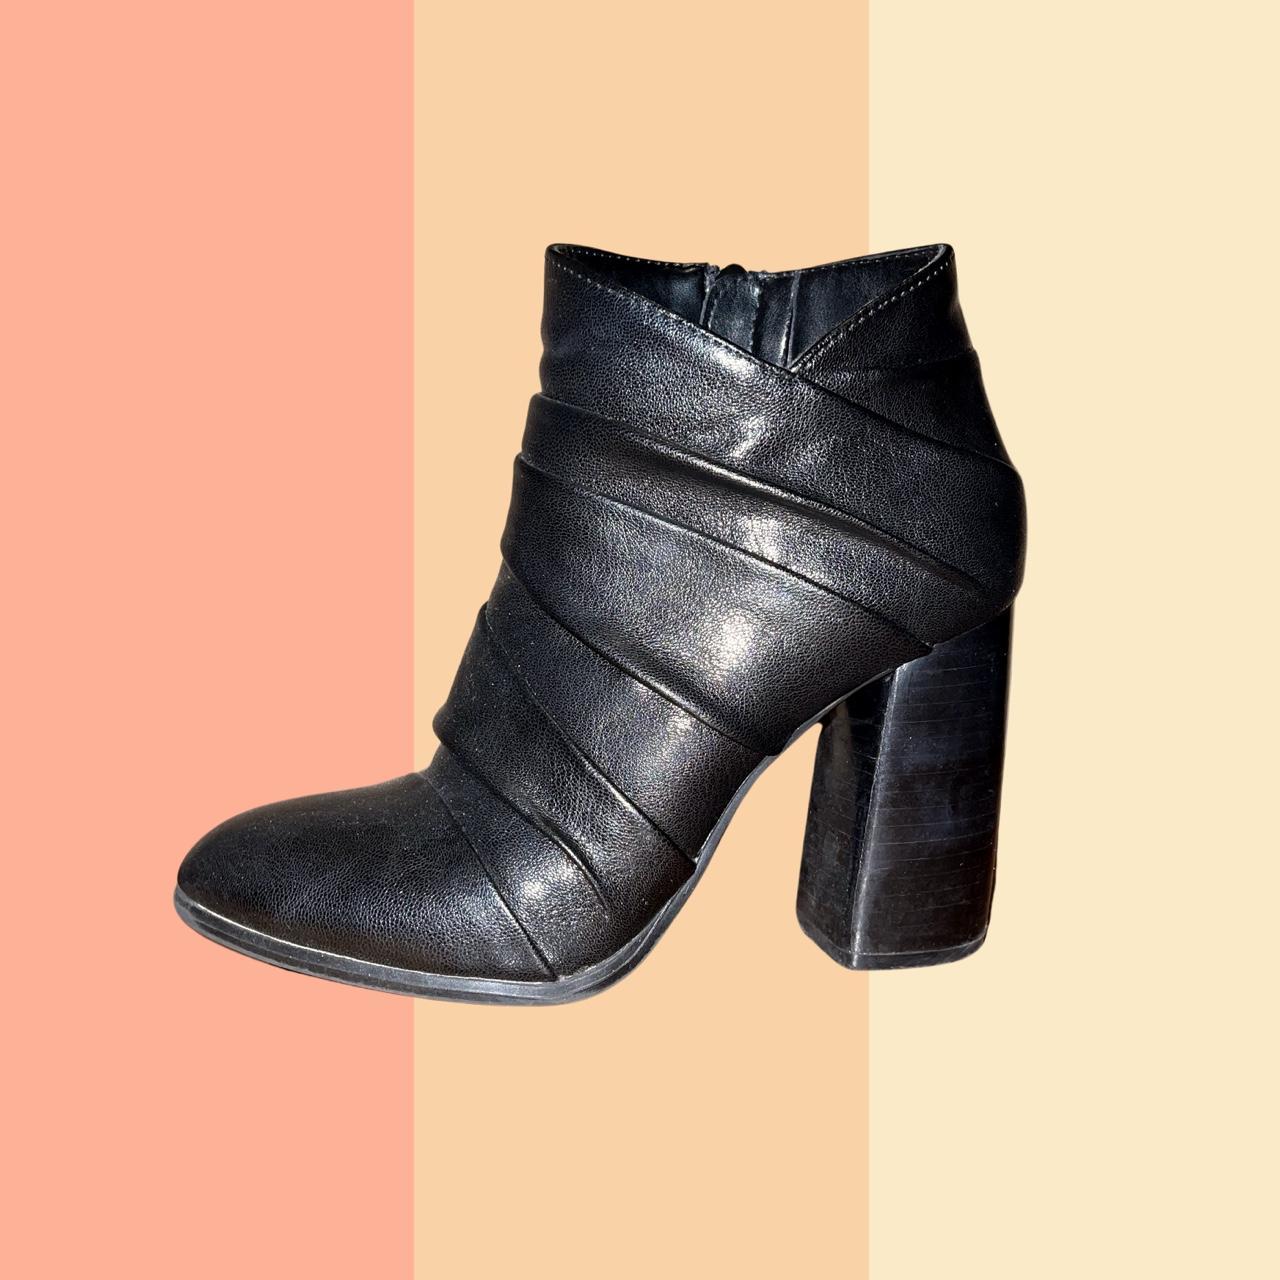 Product Image 2 - IMPO ruched ankle booties

Used to